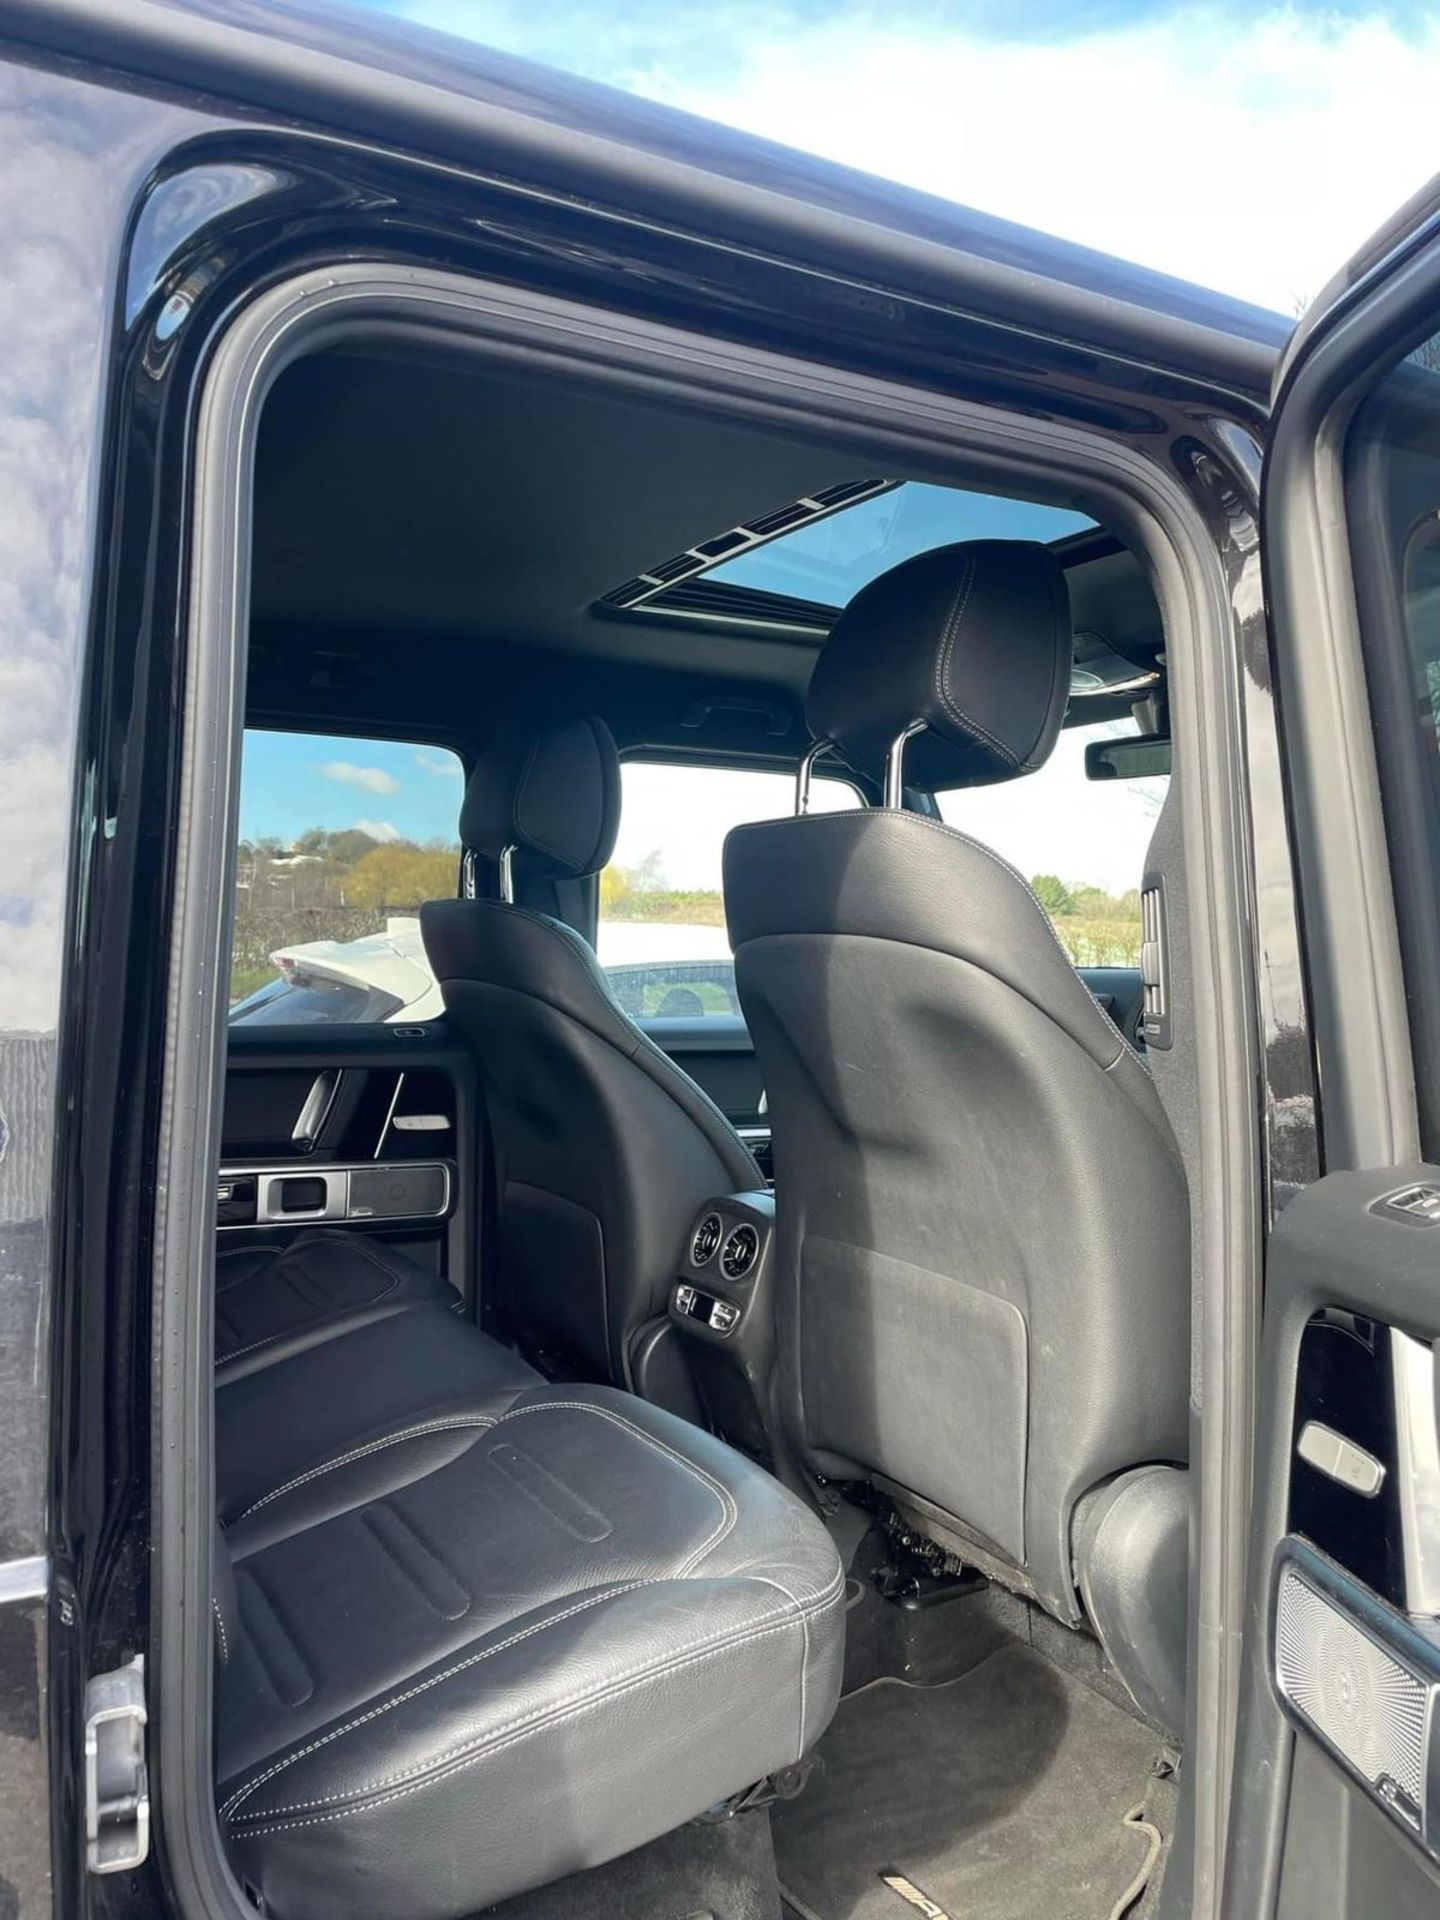 2019/19 REG MERCEDES-BENZ G350 AMG LINE PREMIUM D 4M AUTOMATIC, SHOWING 0 FORMER KEEPERS *PLUS VAT* - Image 8 of 9